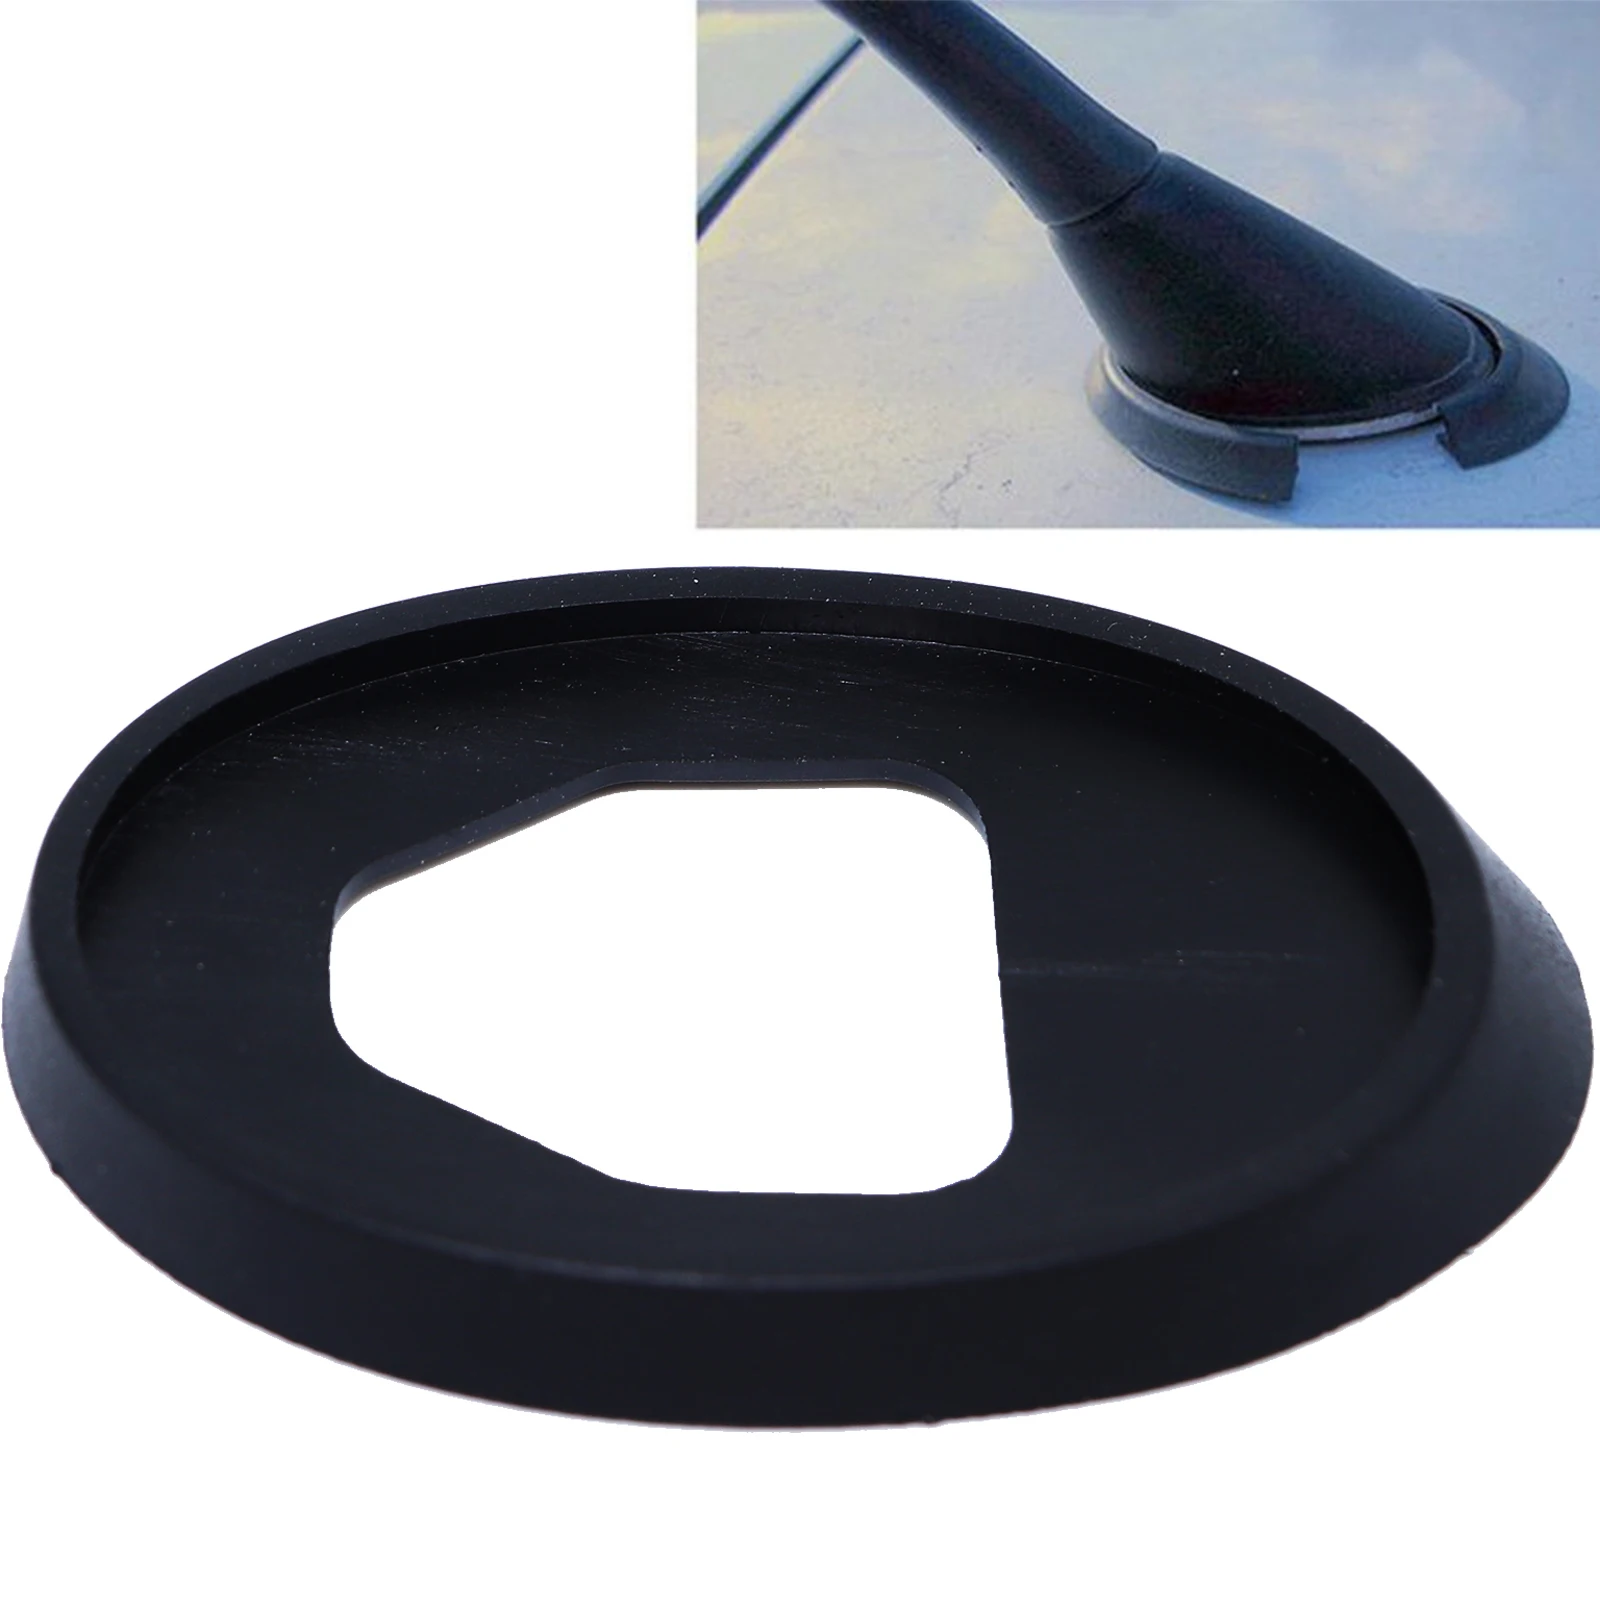 

For Alfa Romeo 147 2000 2001 2002 2003 - 2010 156 159 Roof Mast Whip Aerial Antenna Rubber Base Gasket Seal Pad Car Accessories